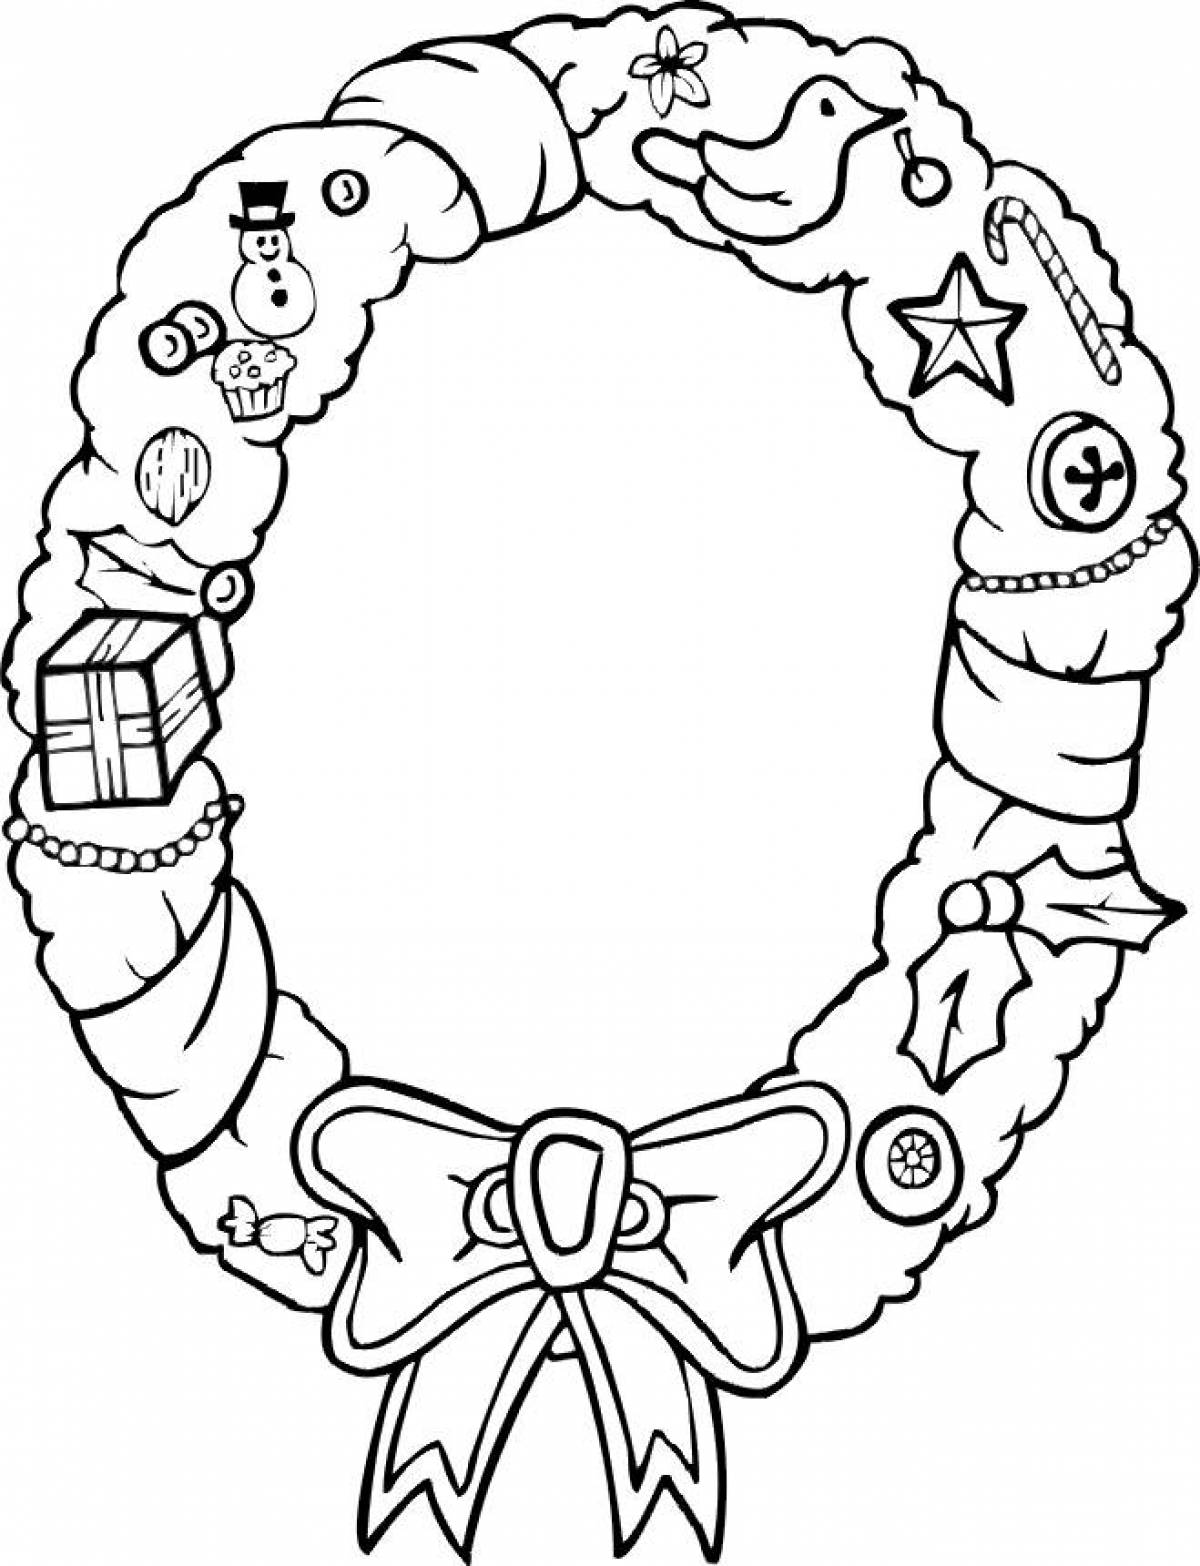 Coloring book inviting Christmas wreath